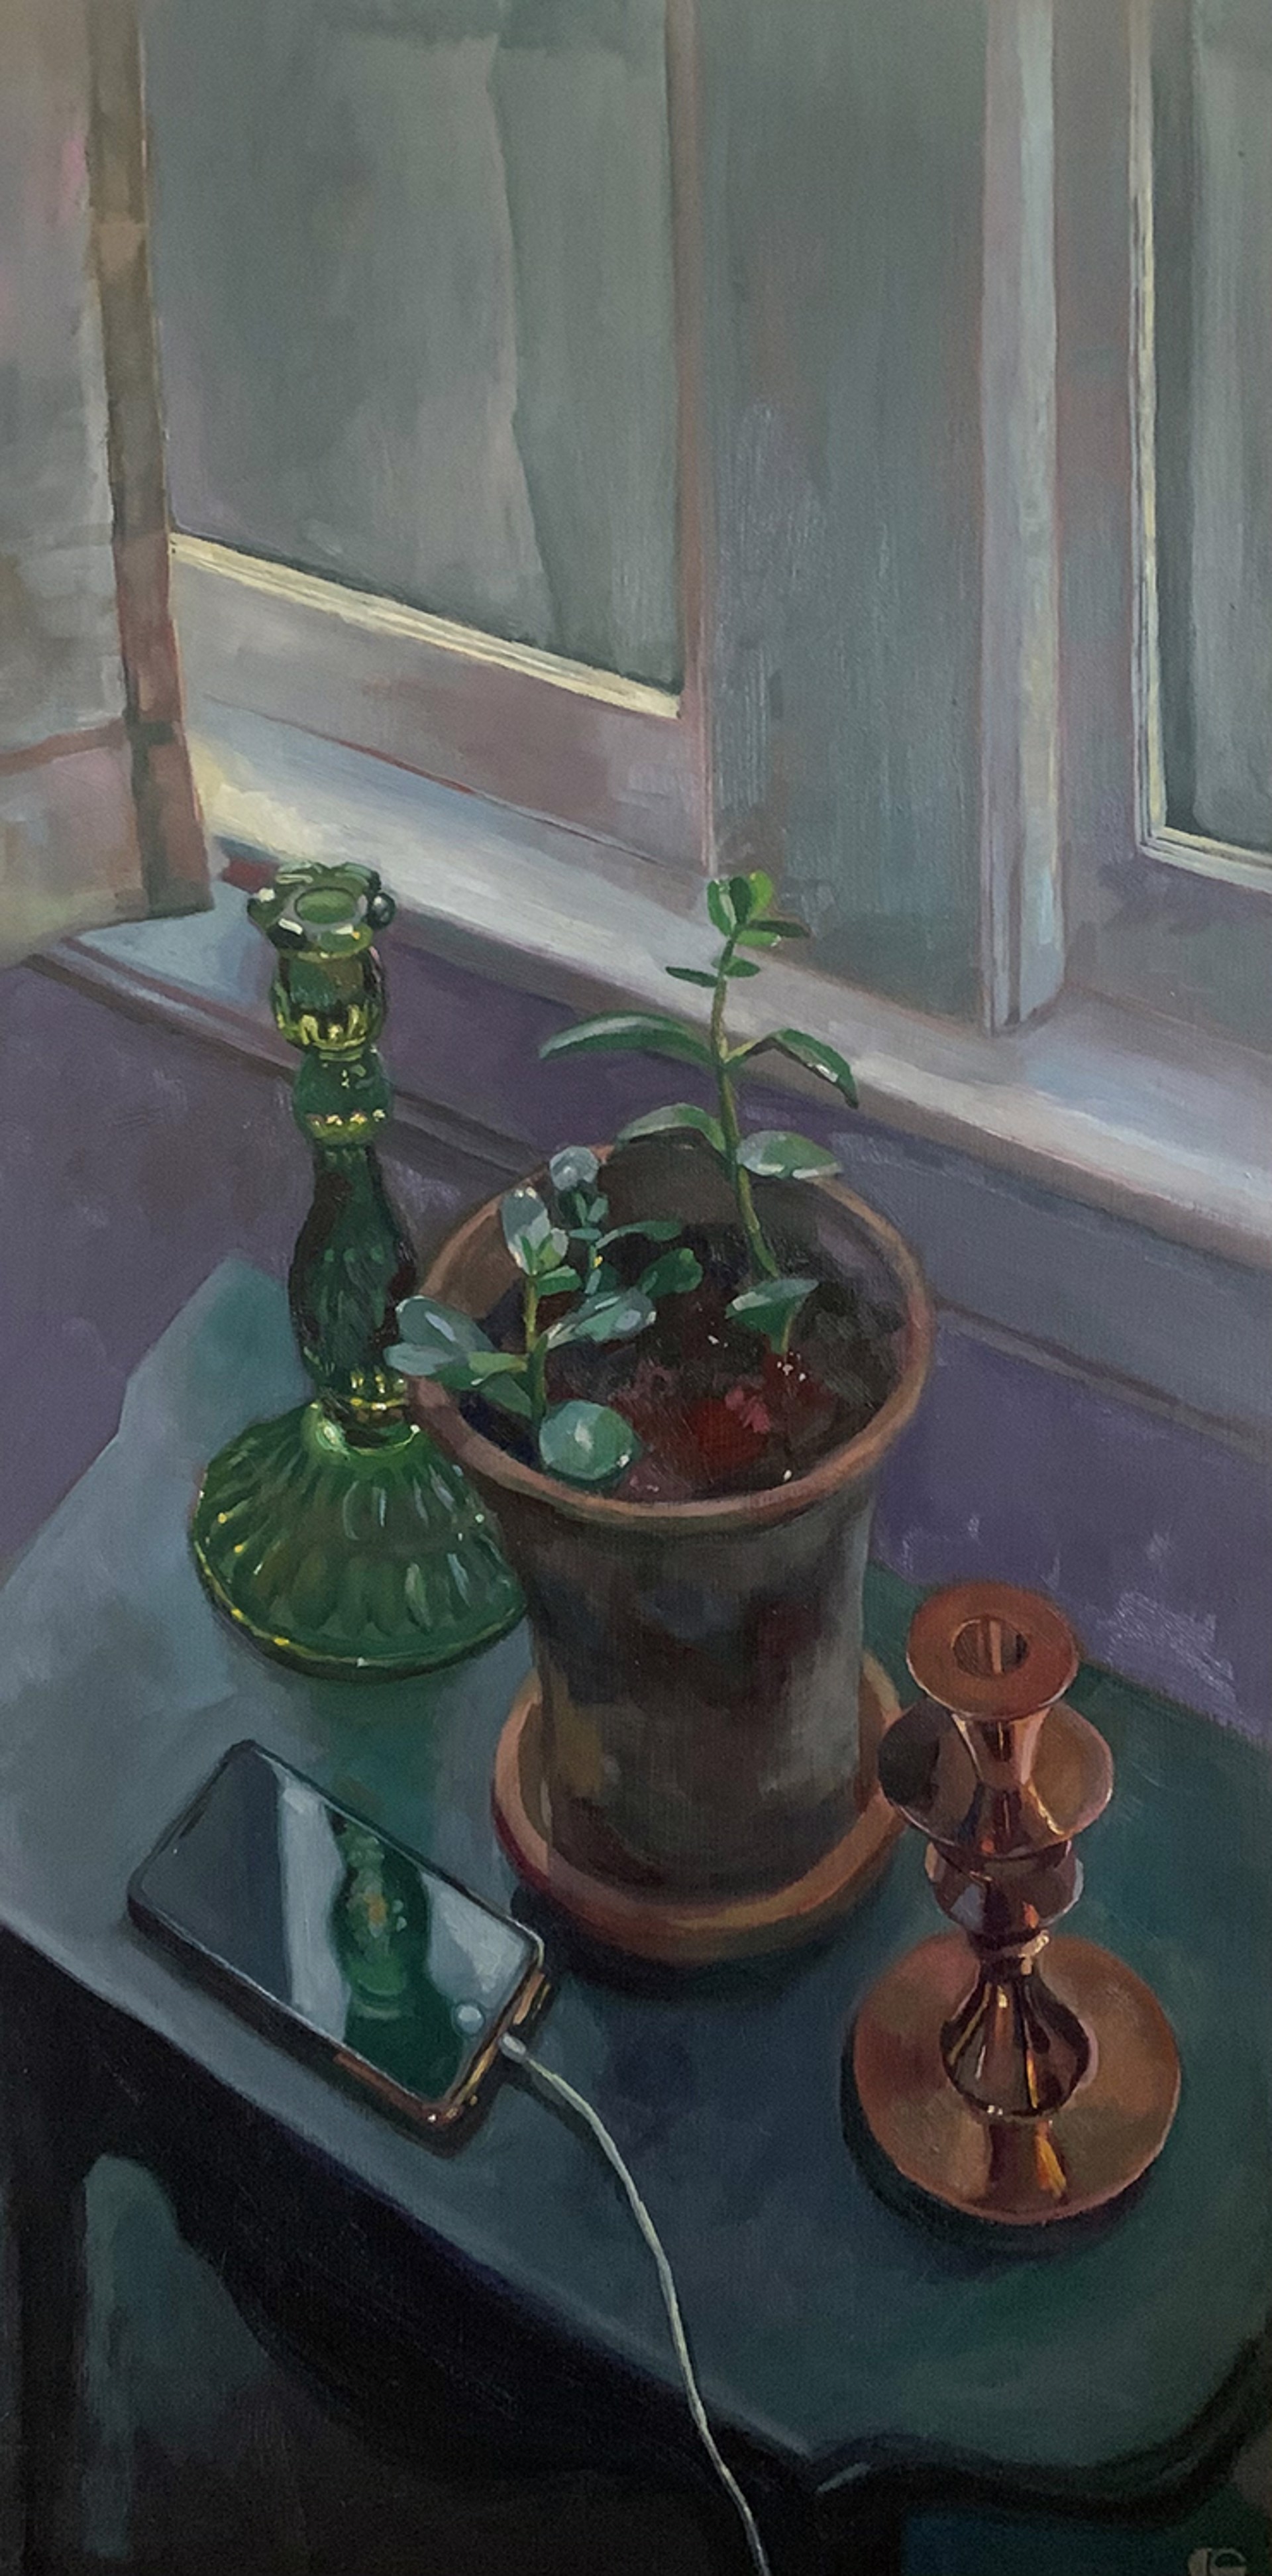 Candlesticks, Jade and Phone by Carl Grauer